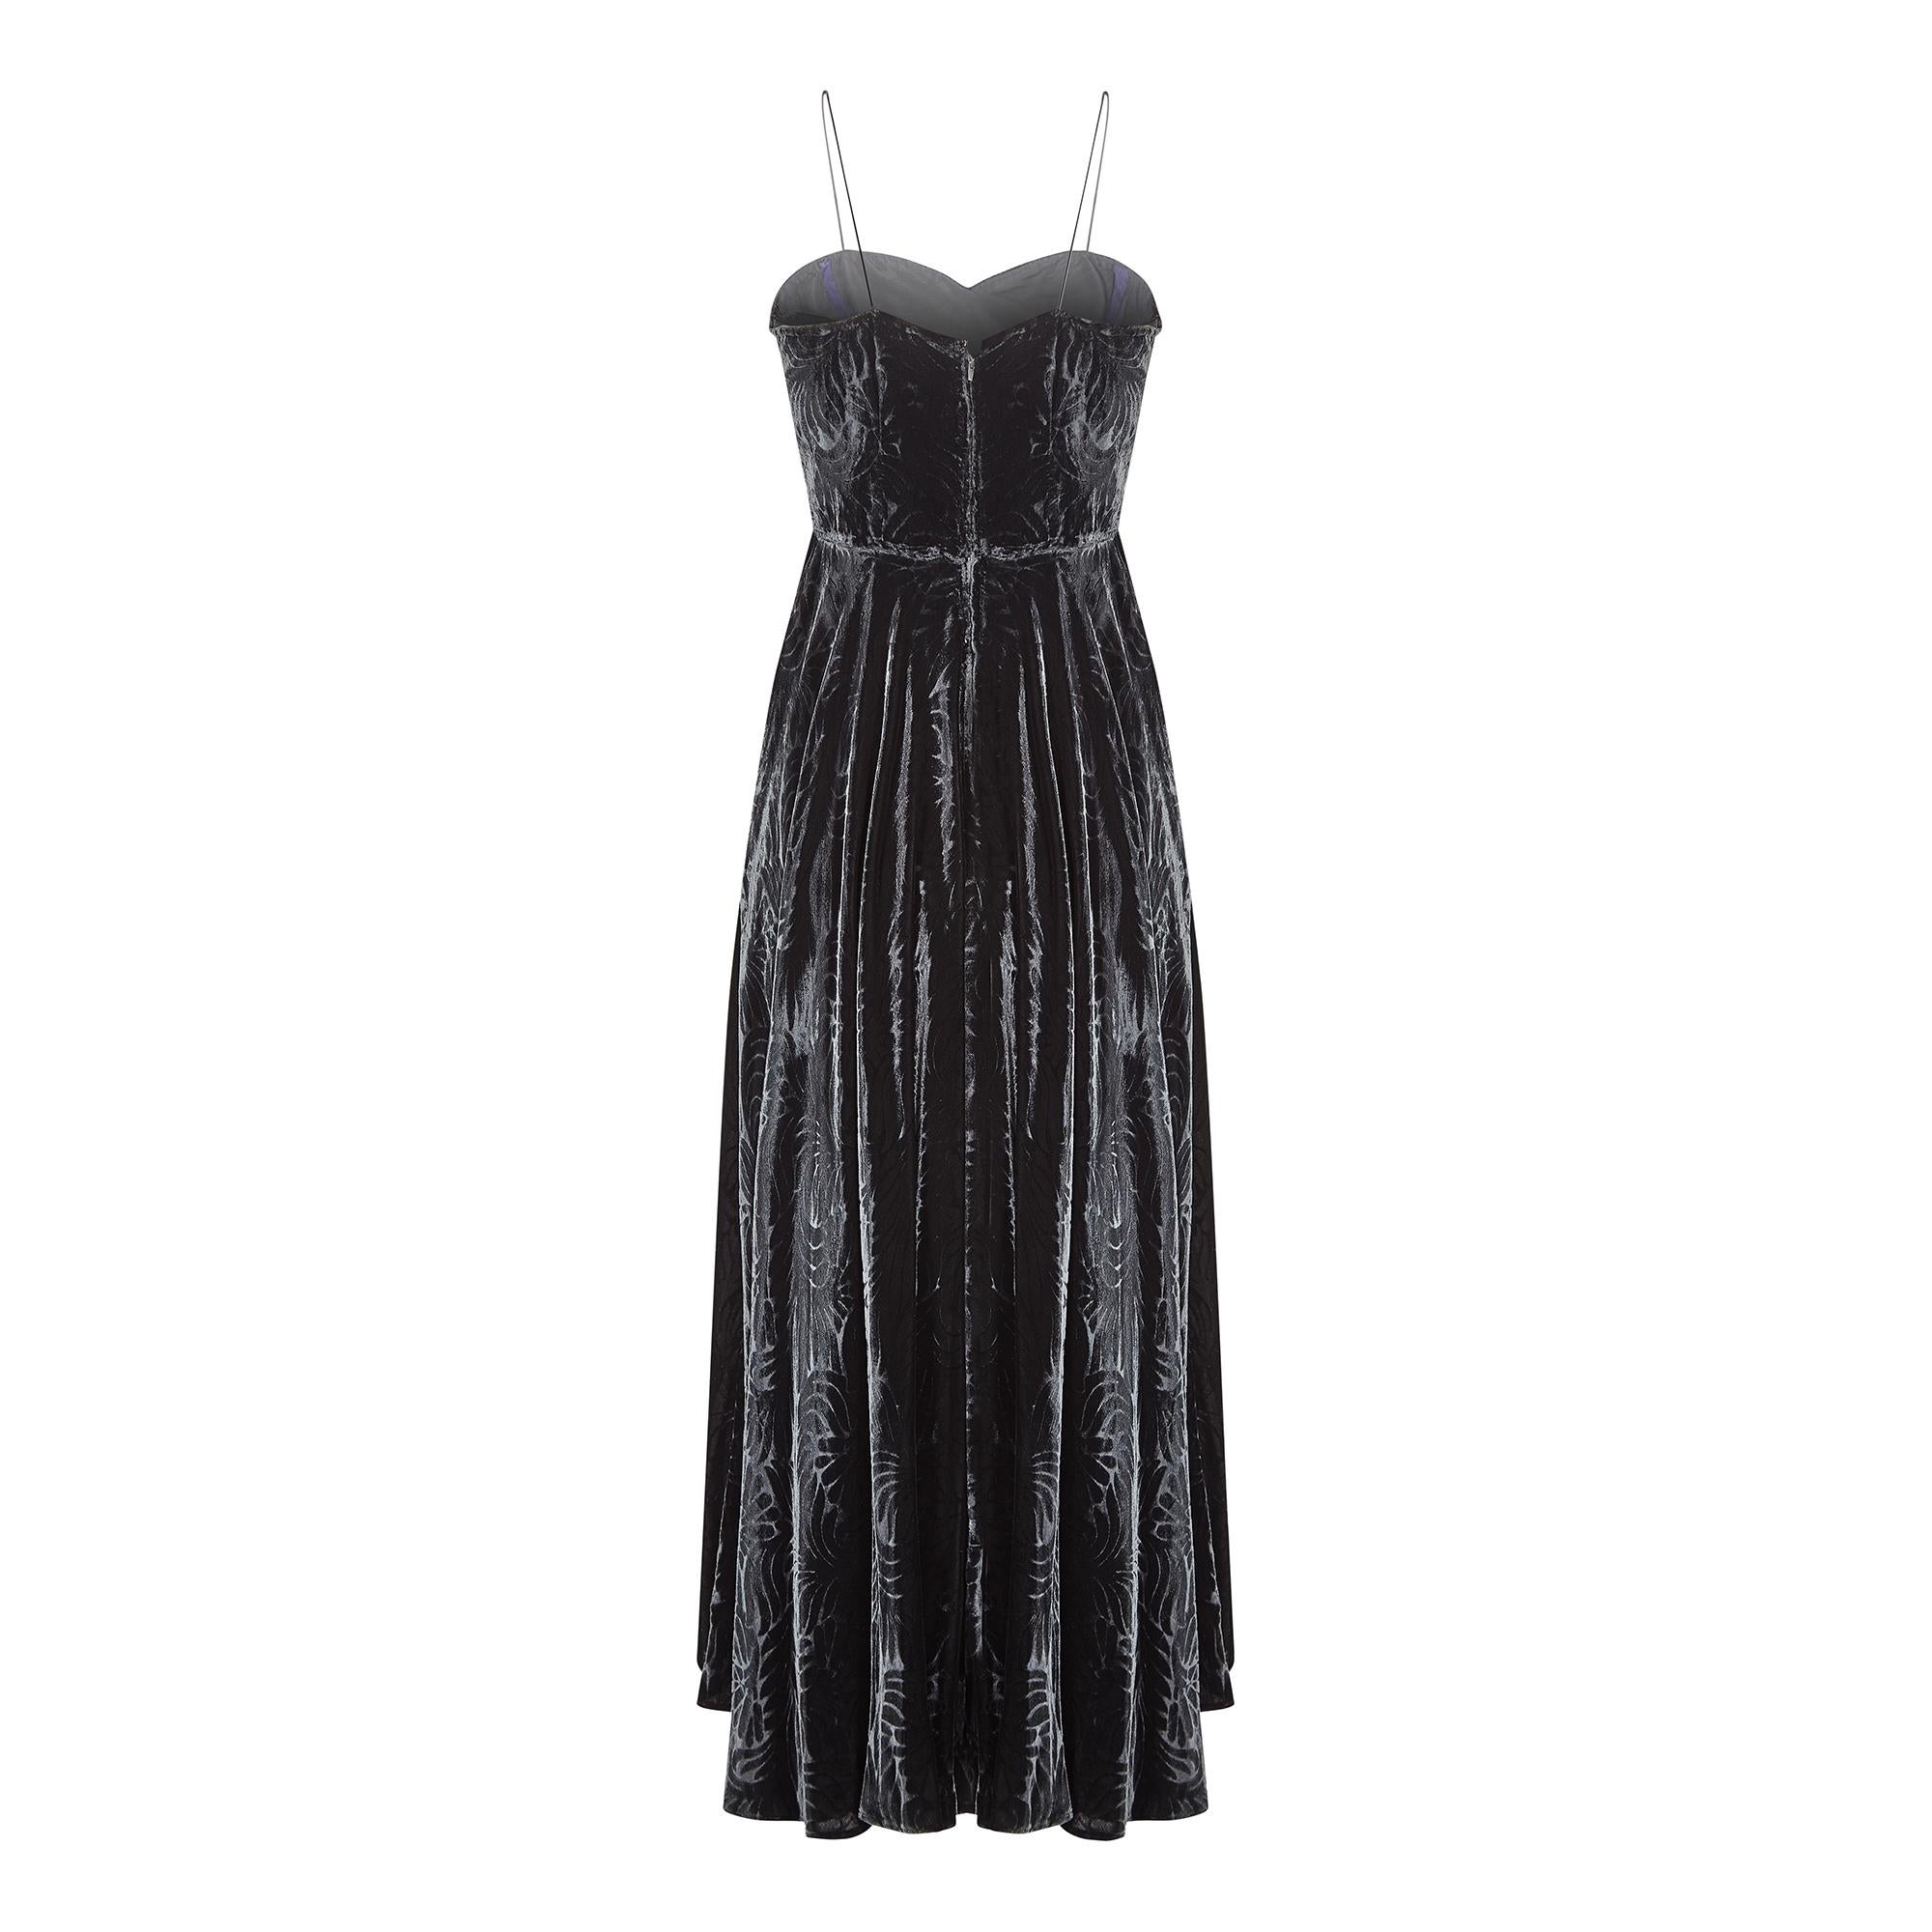 Circa 1940s, this embossed panne silk velvet dress has a fabulous Art Deco floral and leaf print with a full length, panelled skirt.  The full circular hem has bias cut elements which ensure an even flared fit. The bodice is neatly fitted with a